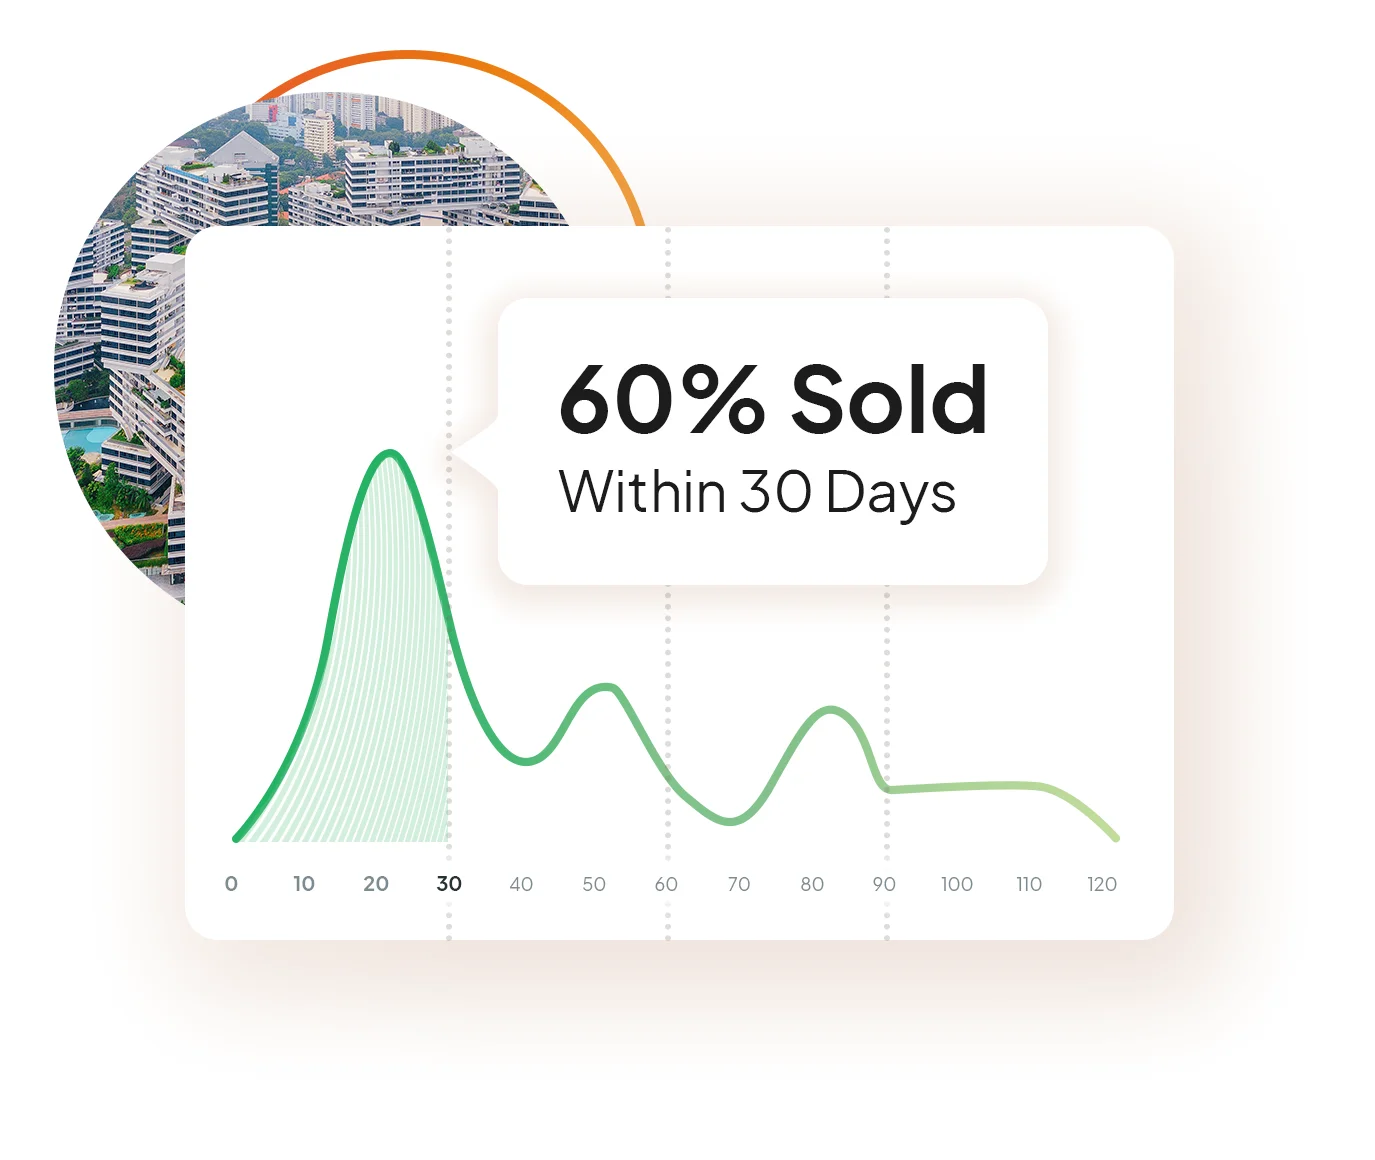 60% of homes sold within 30 days in Singapore | Ohmyhome